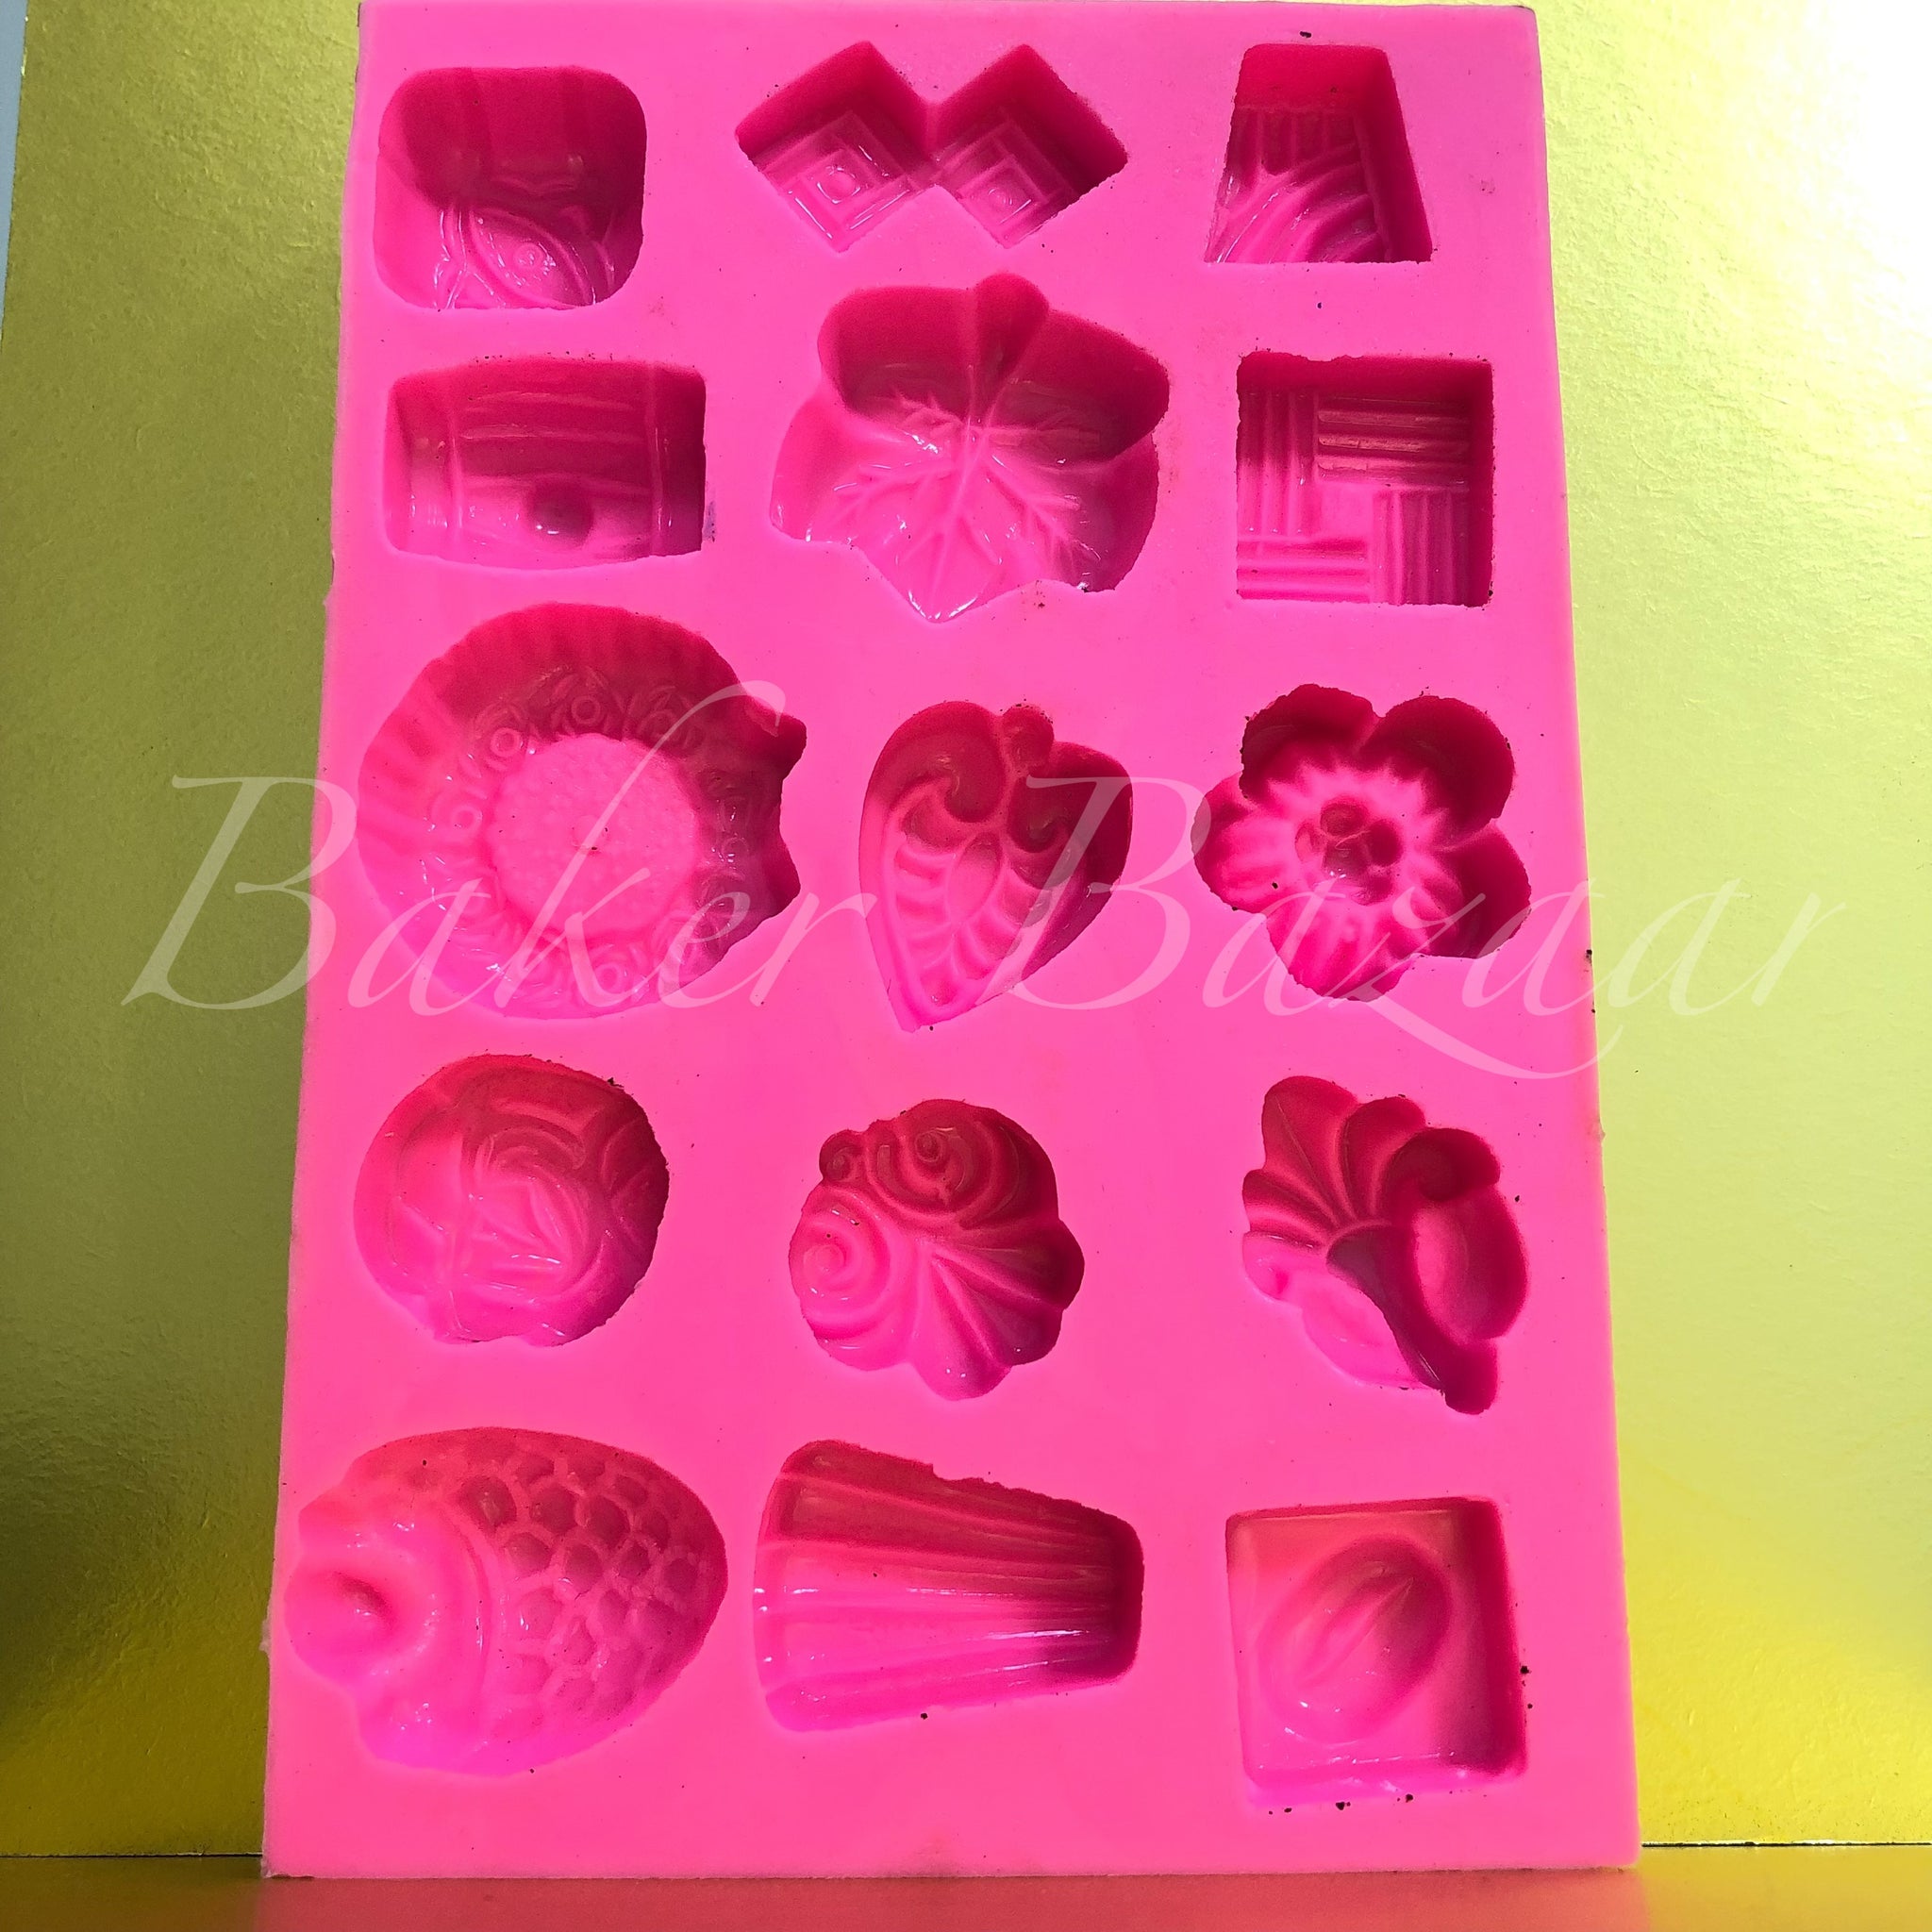 Marzipan Mould No.5 - Silicone Fondant Clay Marzipan Mould - Christmas Special